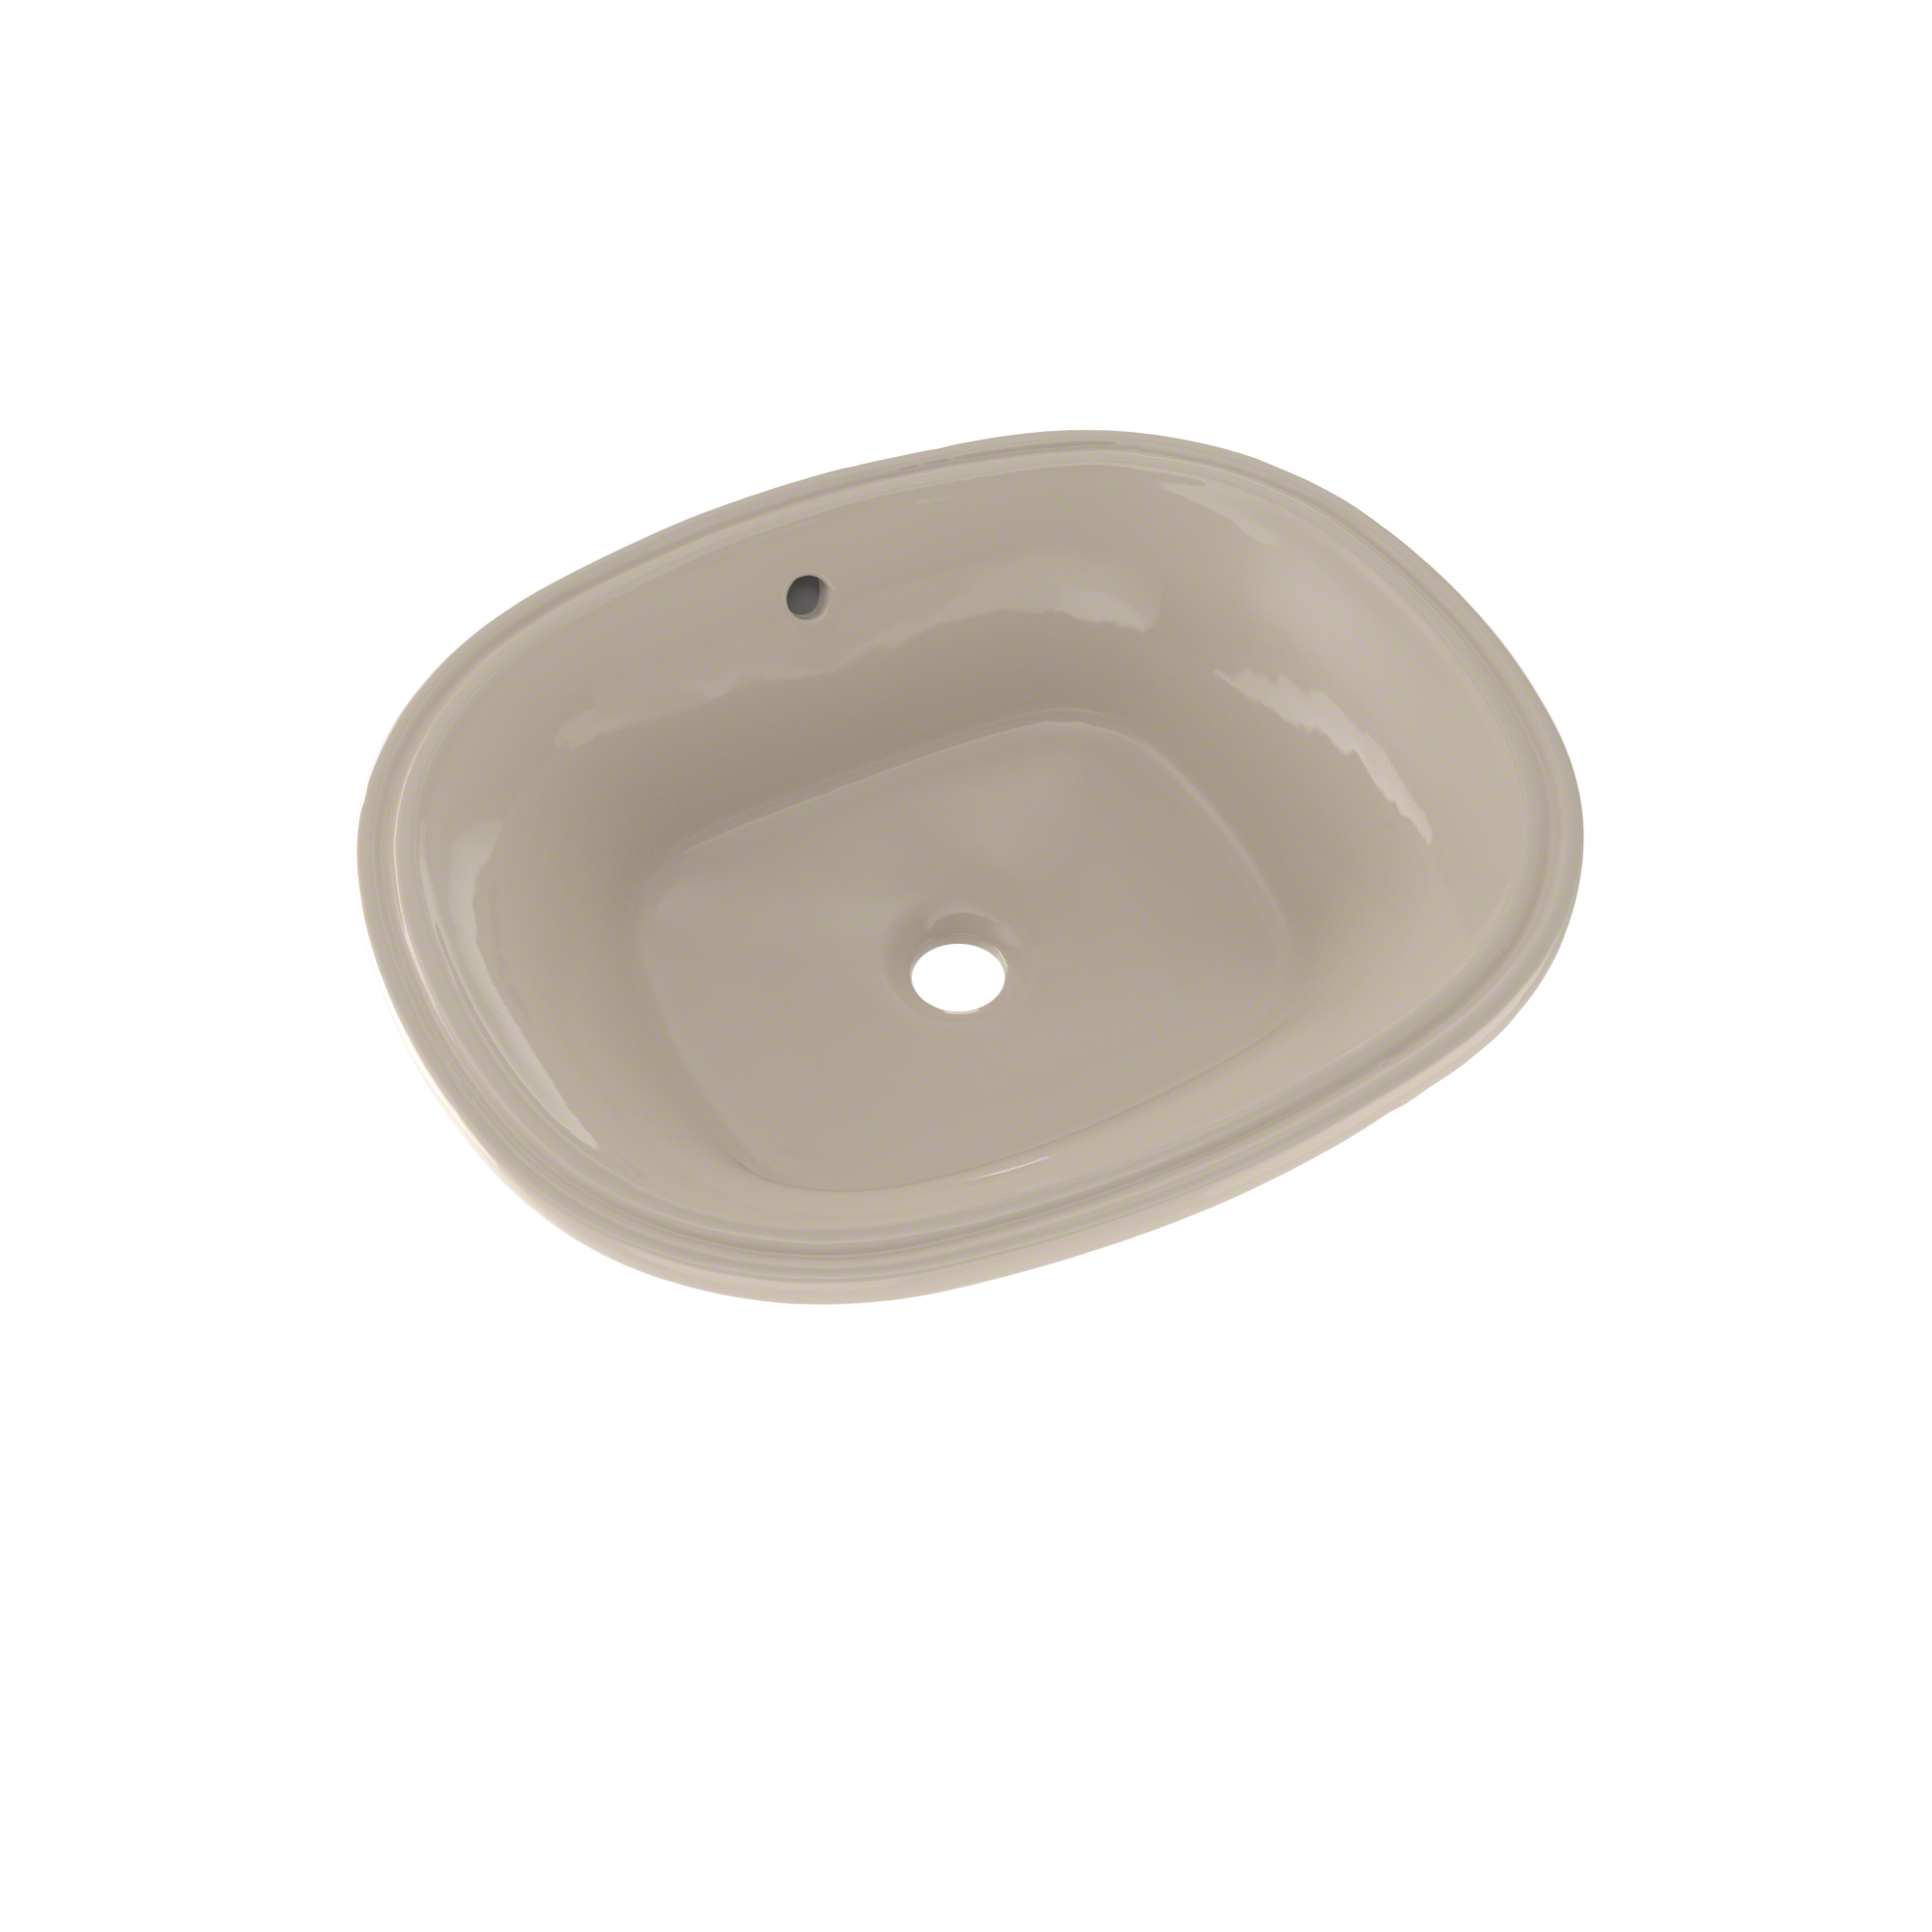 TOTO, TOTO Maris 17-5/8" x 14-9/16" Oval Undermount Bathroom Sink with CeFiONtect, Bone LT483G#03